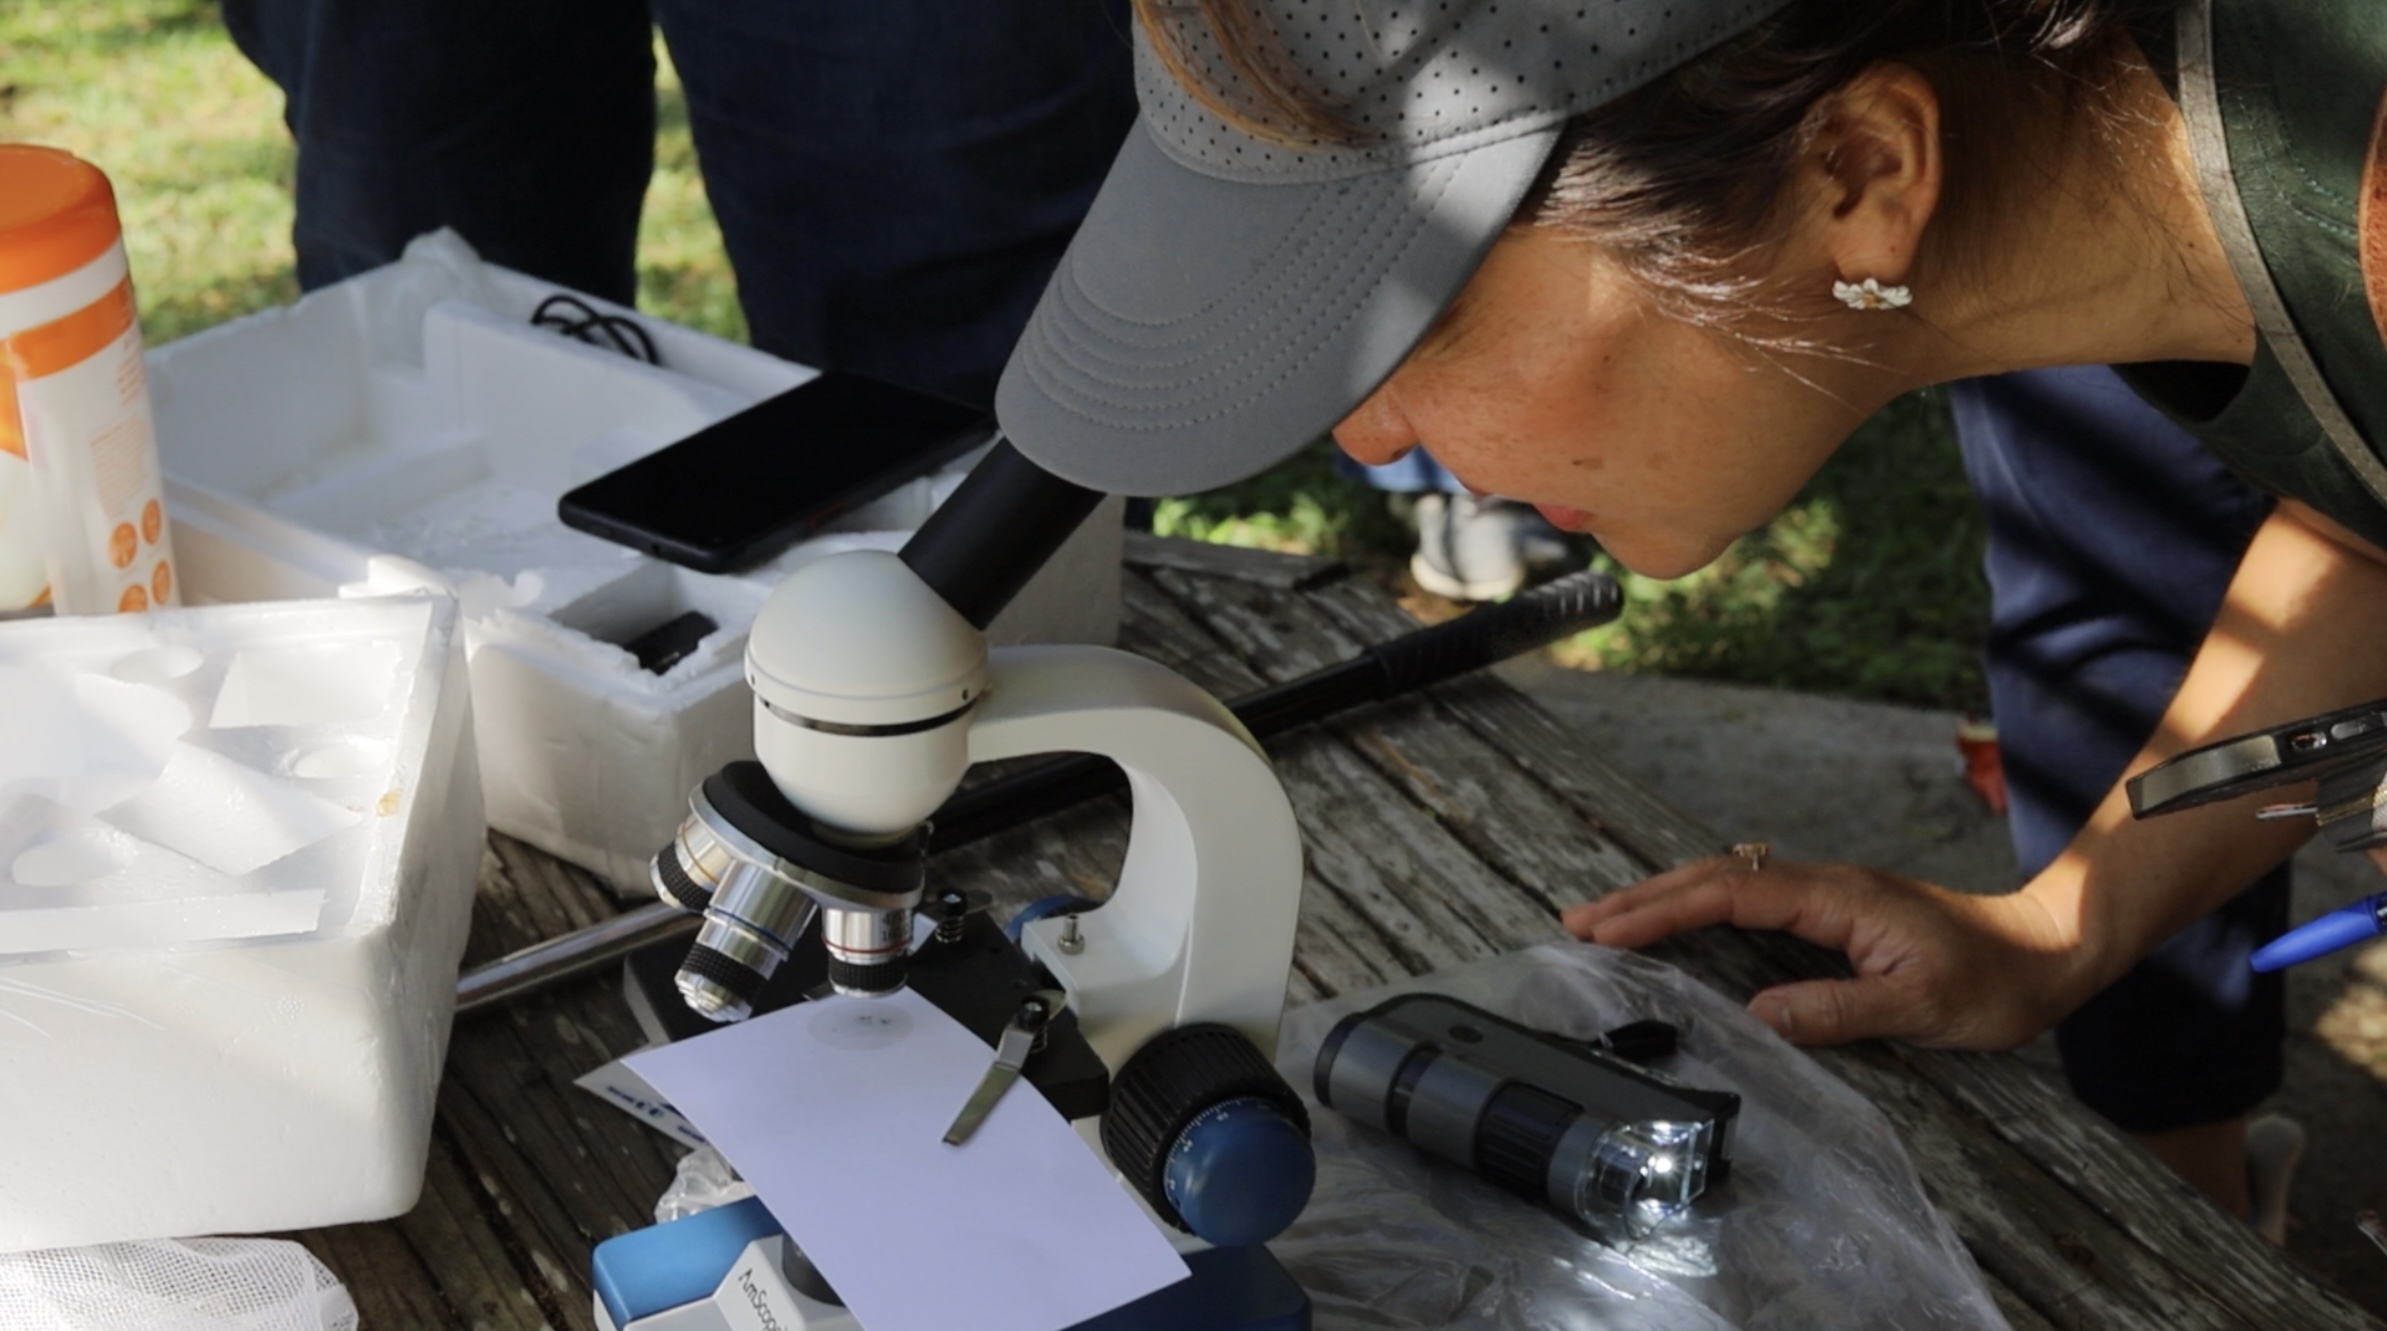 A person wearing a cap looks into a microscope.